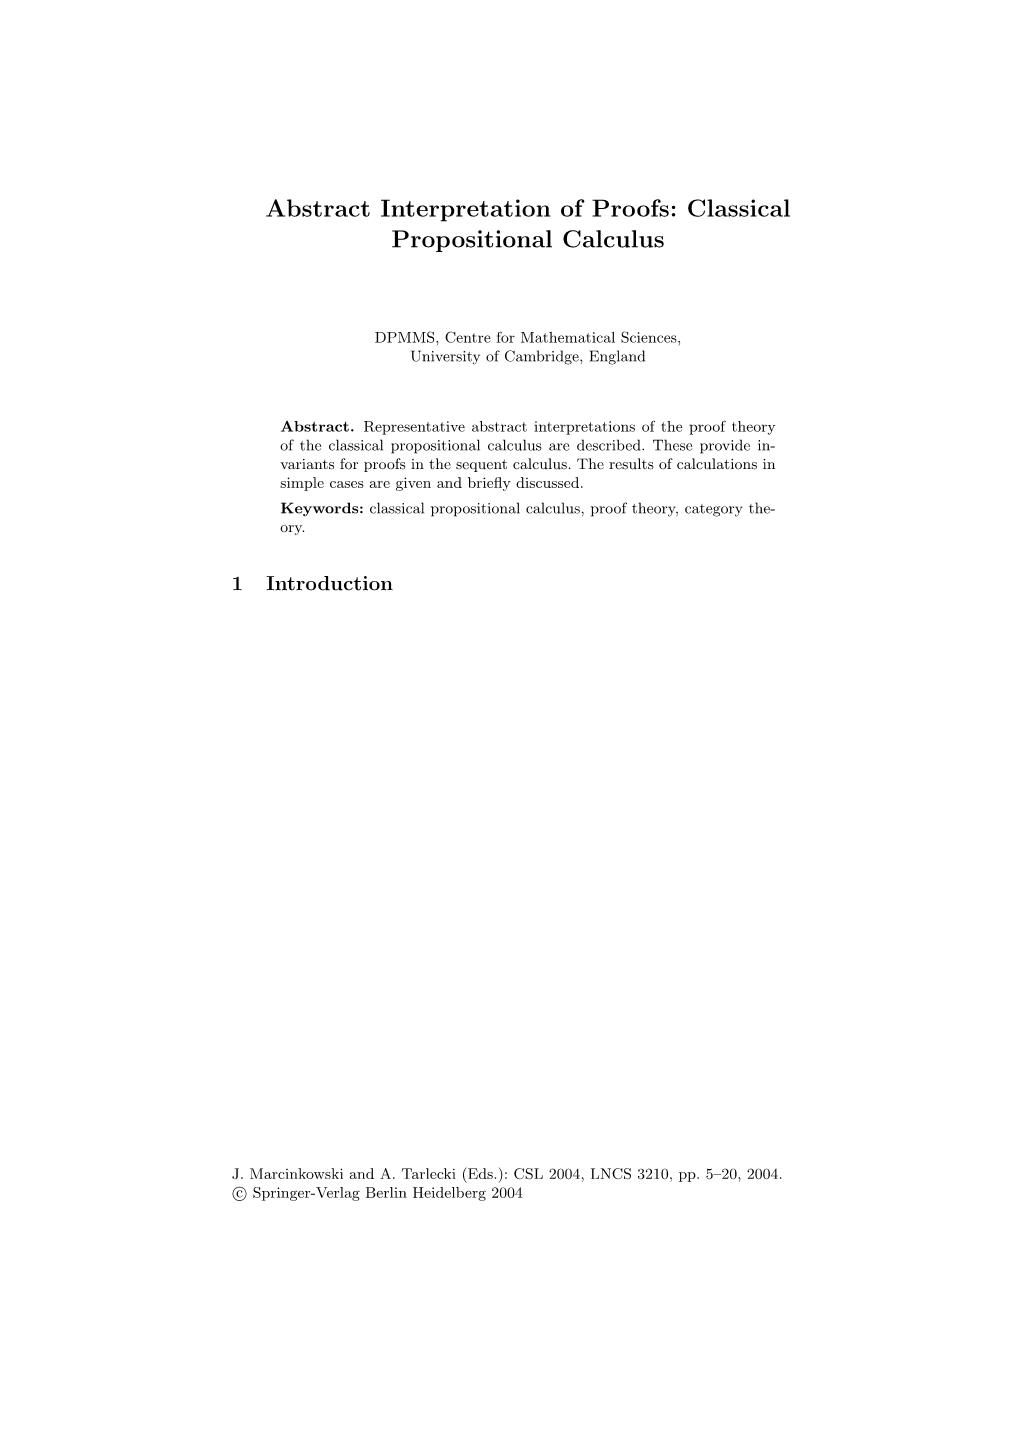 Abstract Interpretation of Proofs: Classical Propositional Calculus